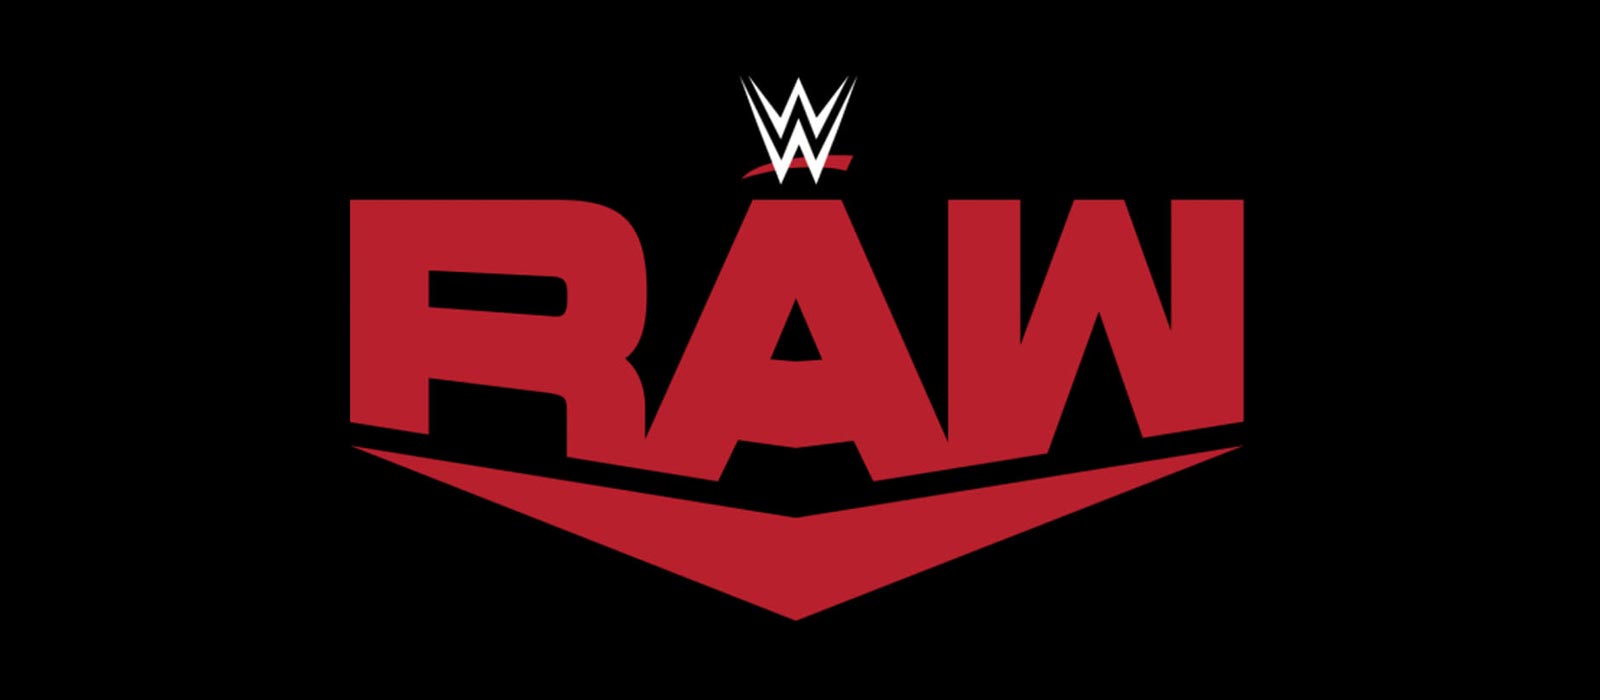 WWE Monday Night RAW : The Road to WWE Money in the Bank 2020 Begins